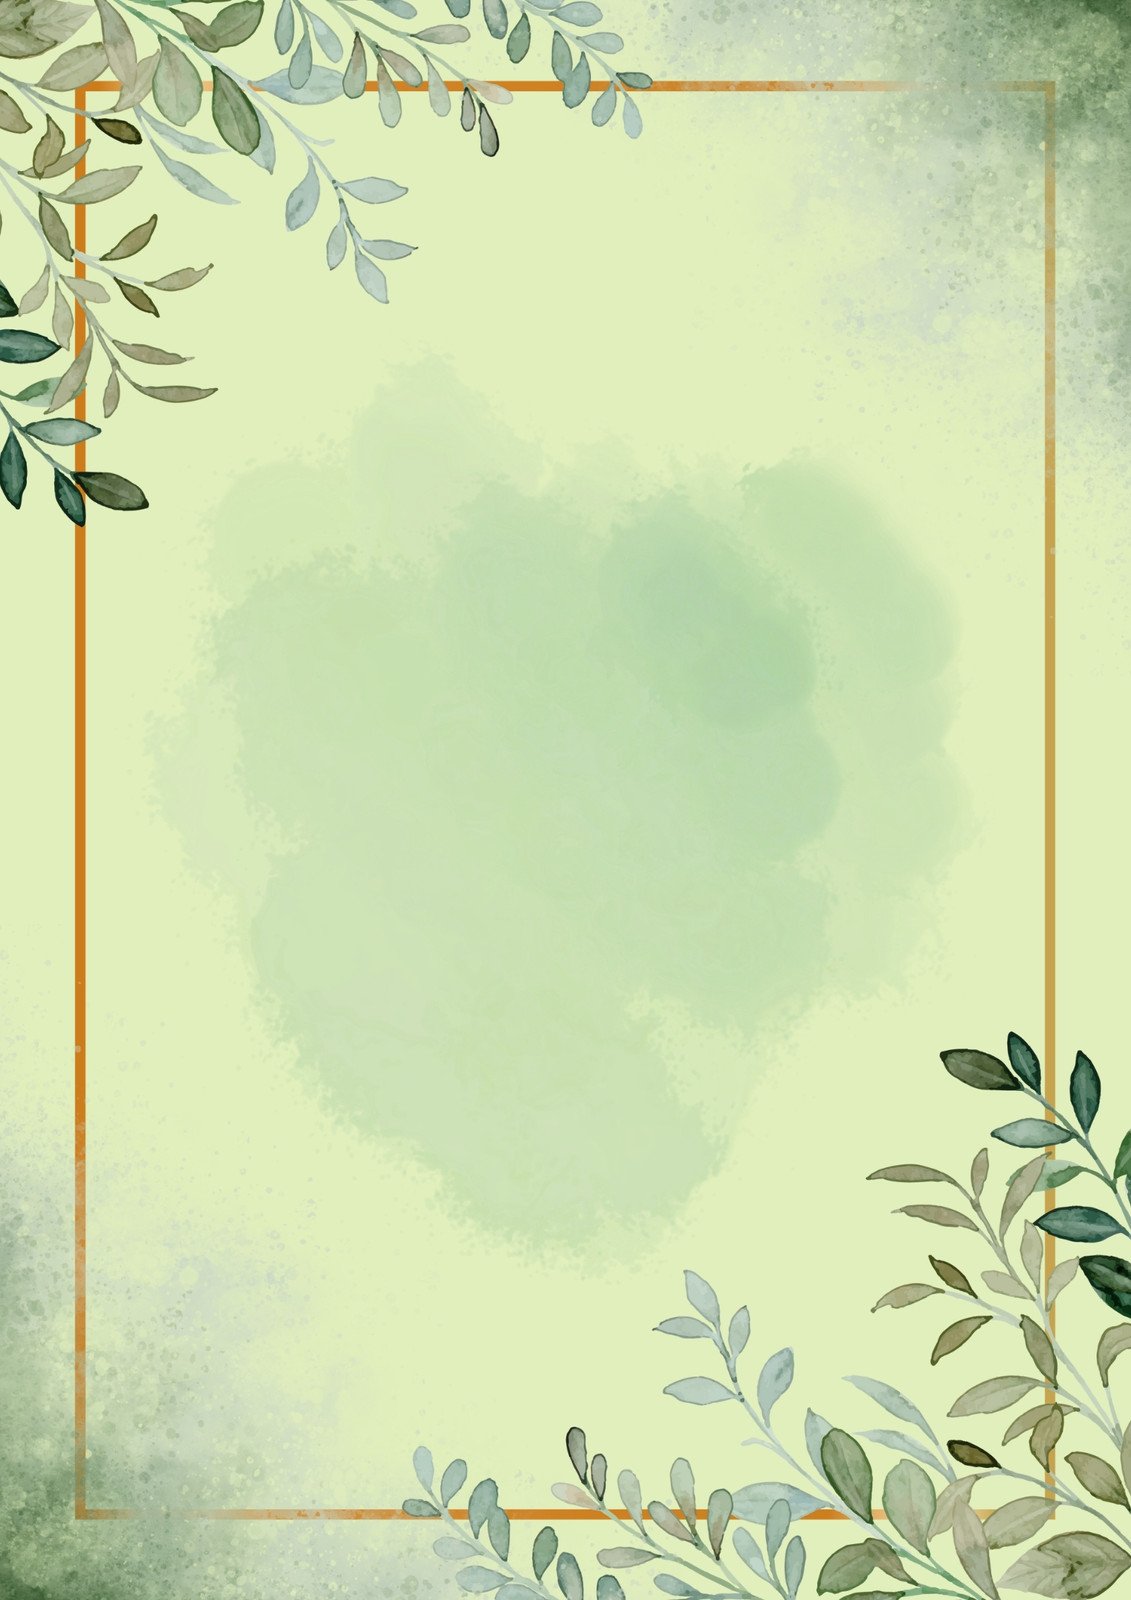 Free and customizable green background templates